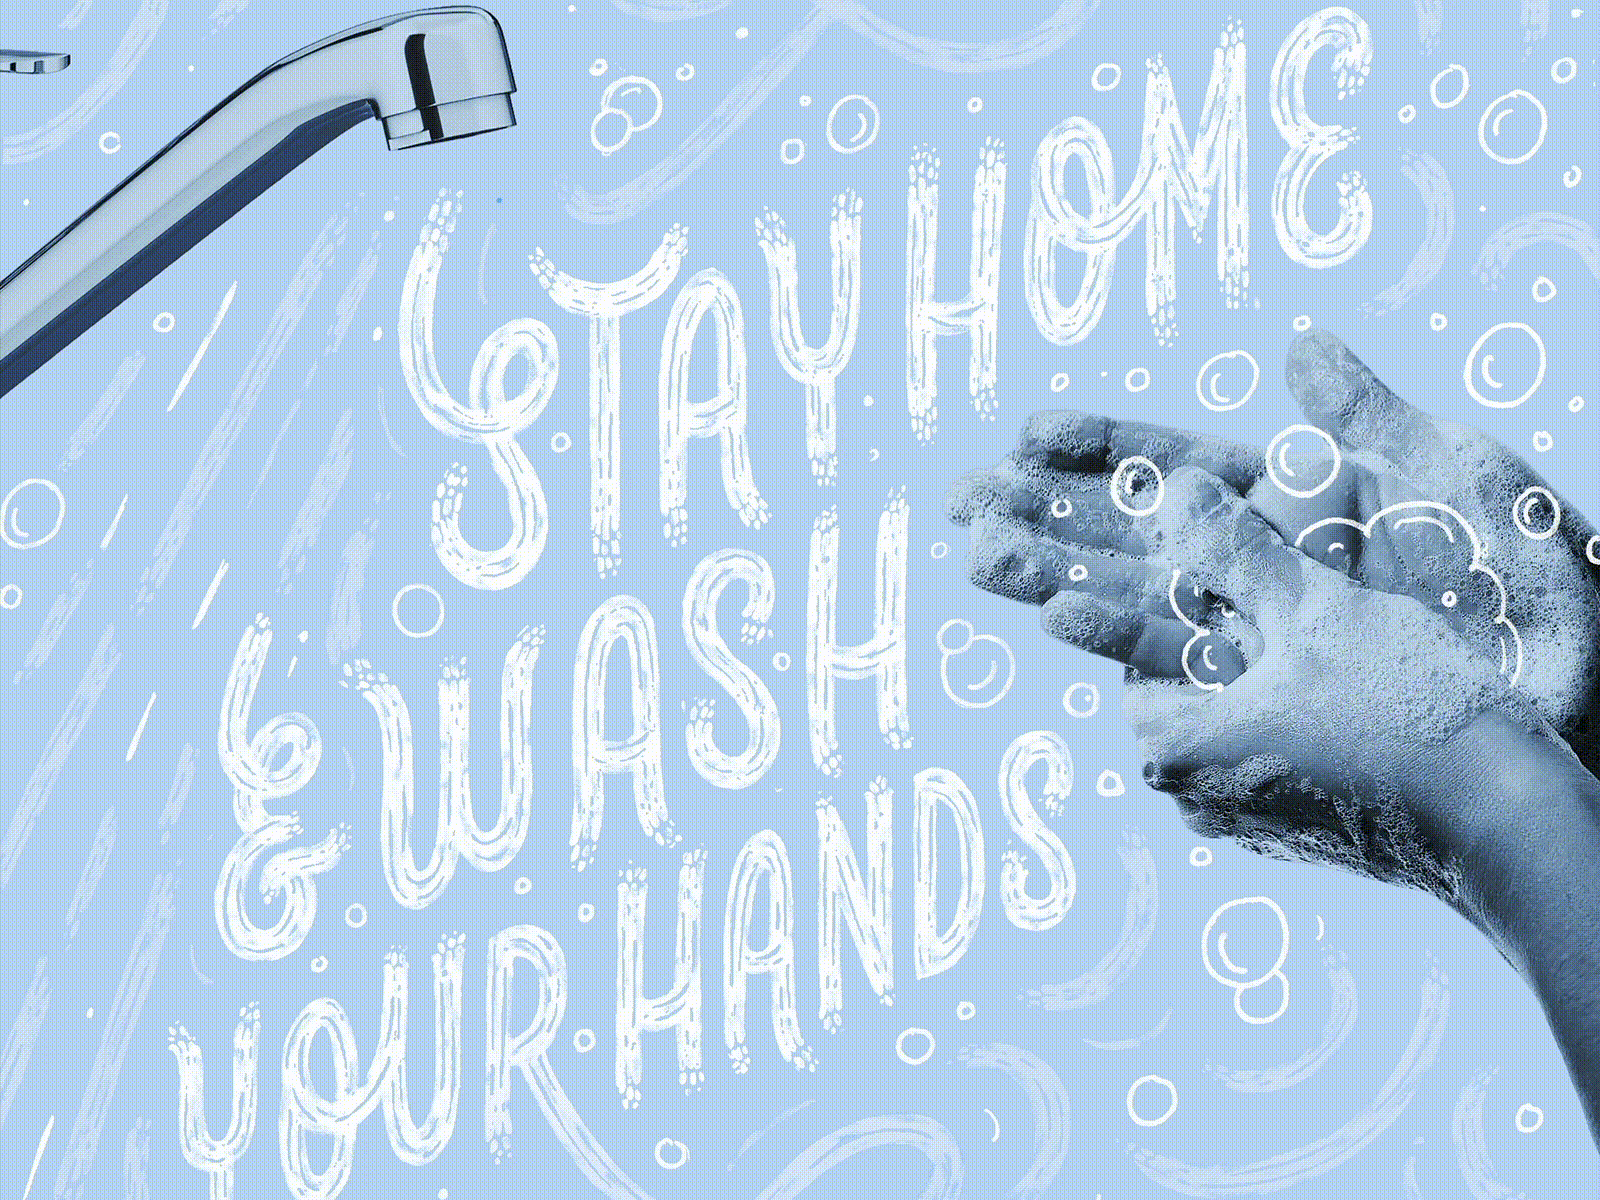 Stay home and wash your hands